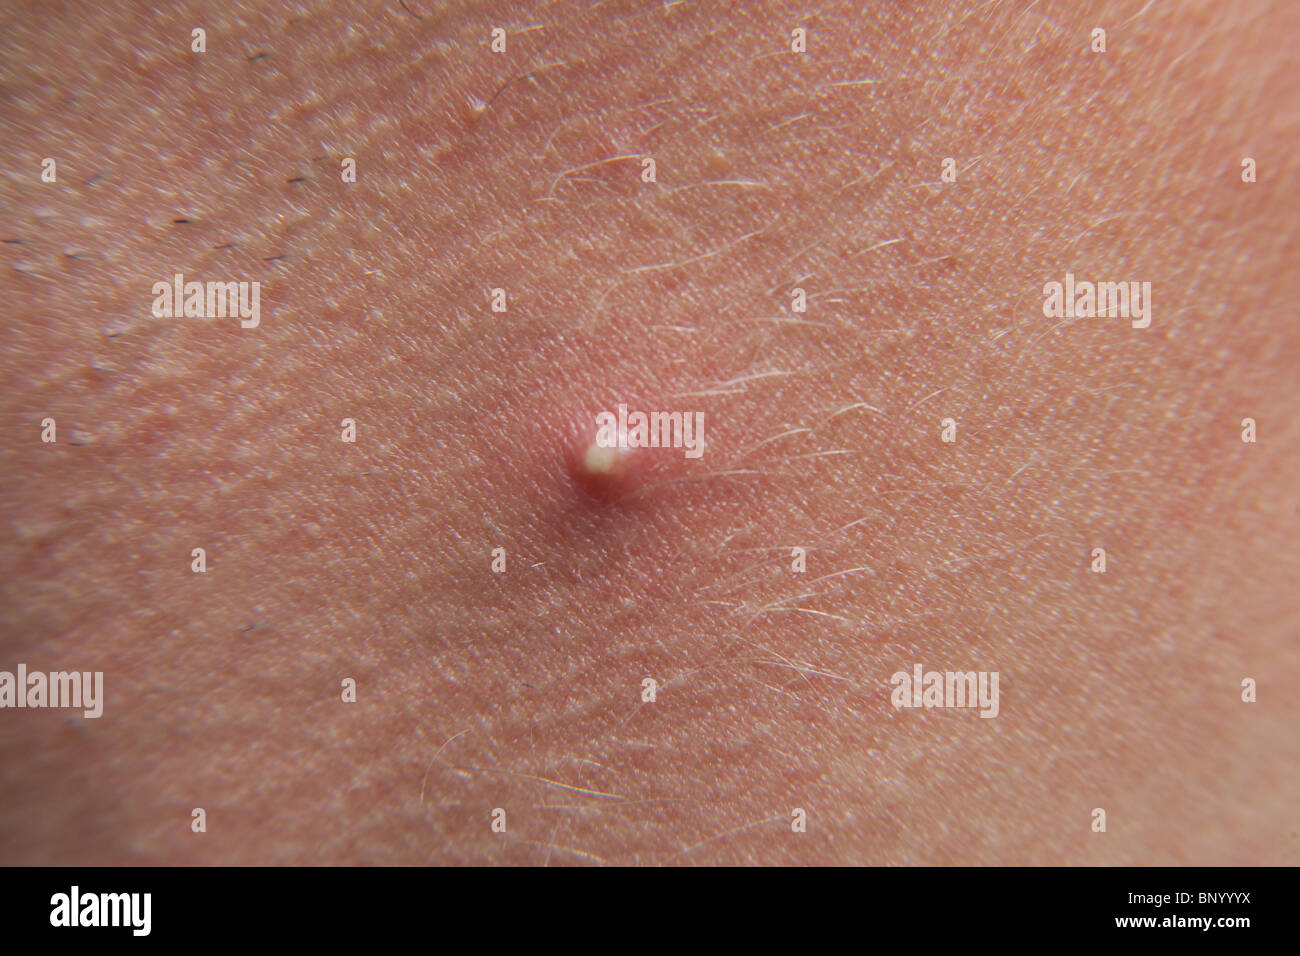 Large acne spot or pimple on a mans neck. Stock Photo